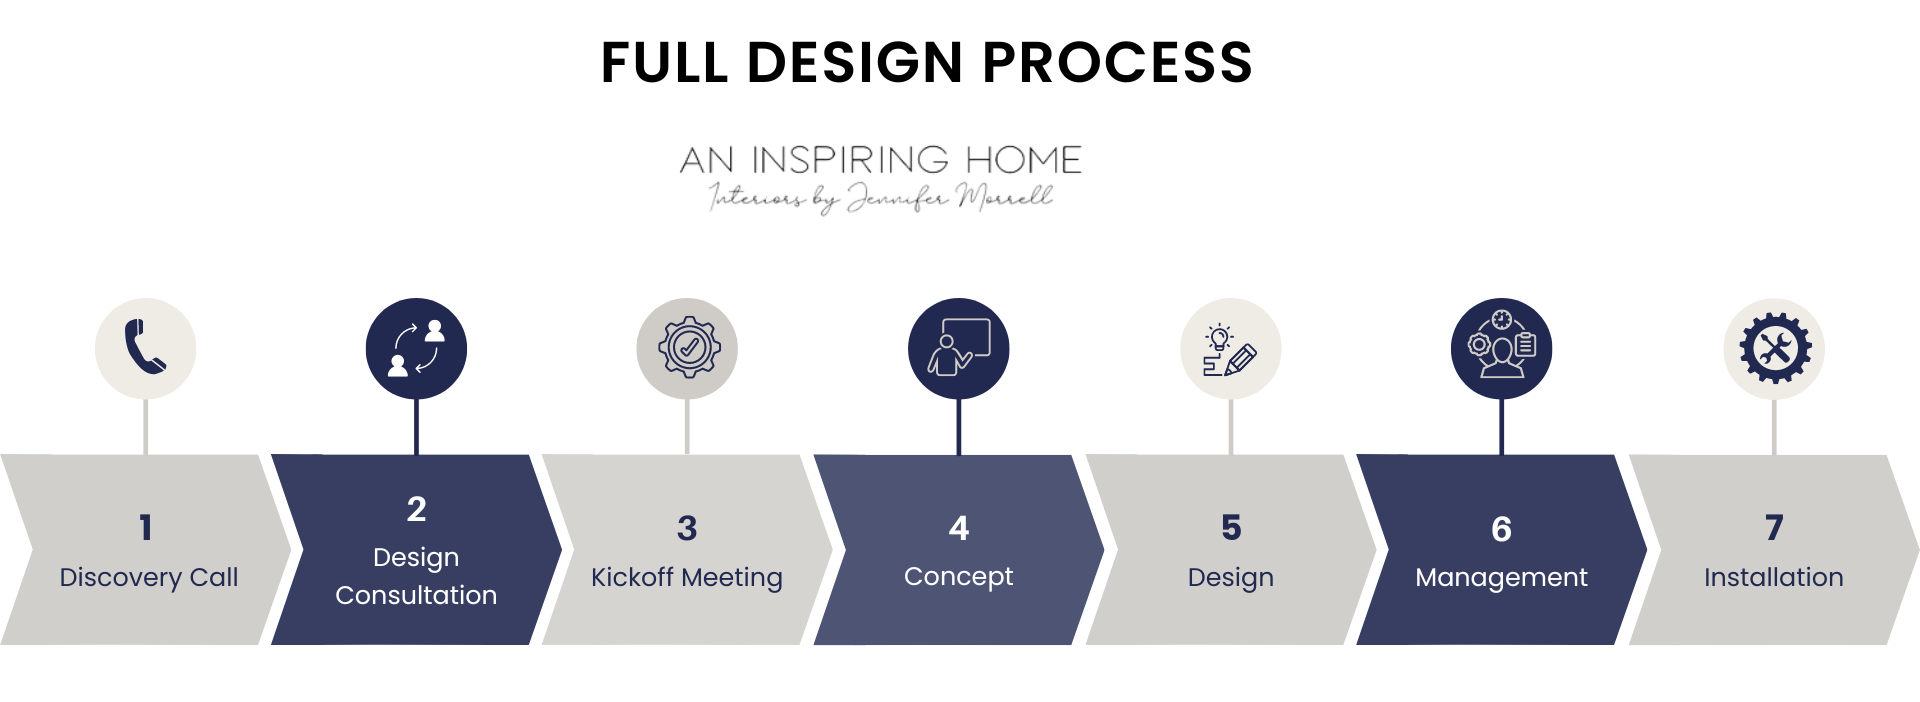 What to Know About Working With an Interior Designer